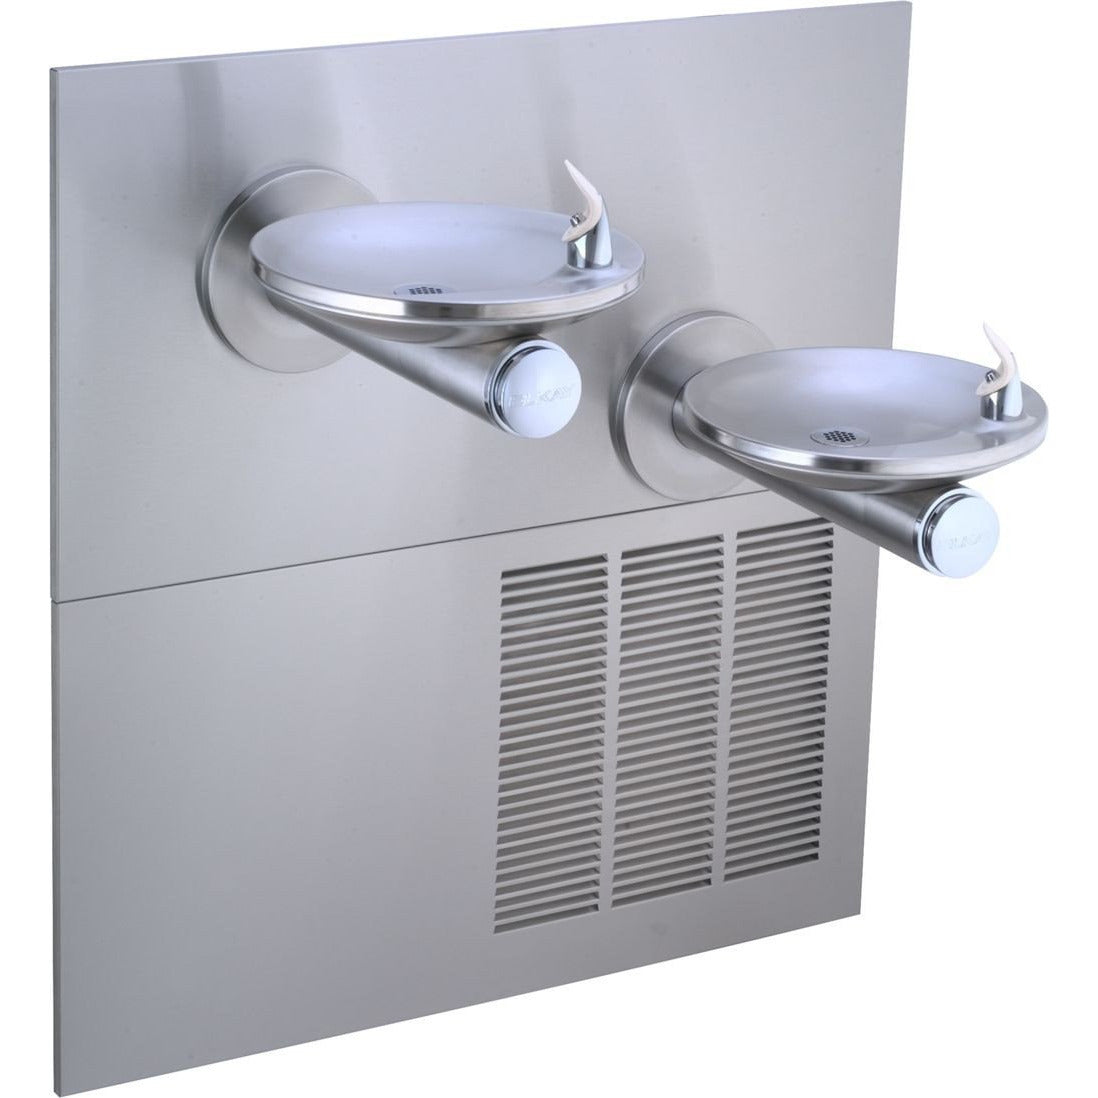 Elkay ERPBM28K | In-wall Bi-level Swirlfo Drinking Fountain | Filterless, Refrigerated (Comes with Mounting Frame) - BottleFillingStations.com